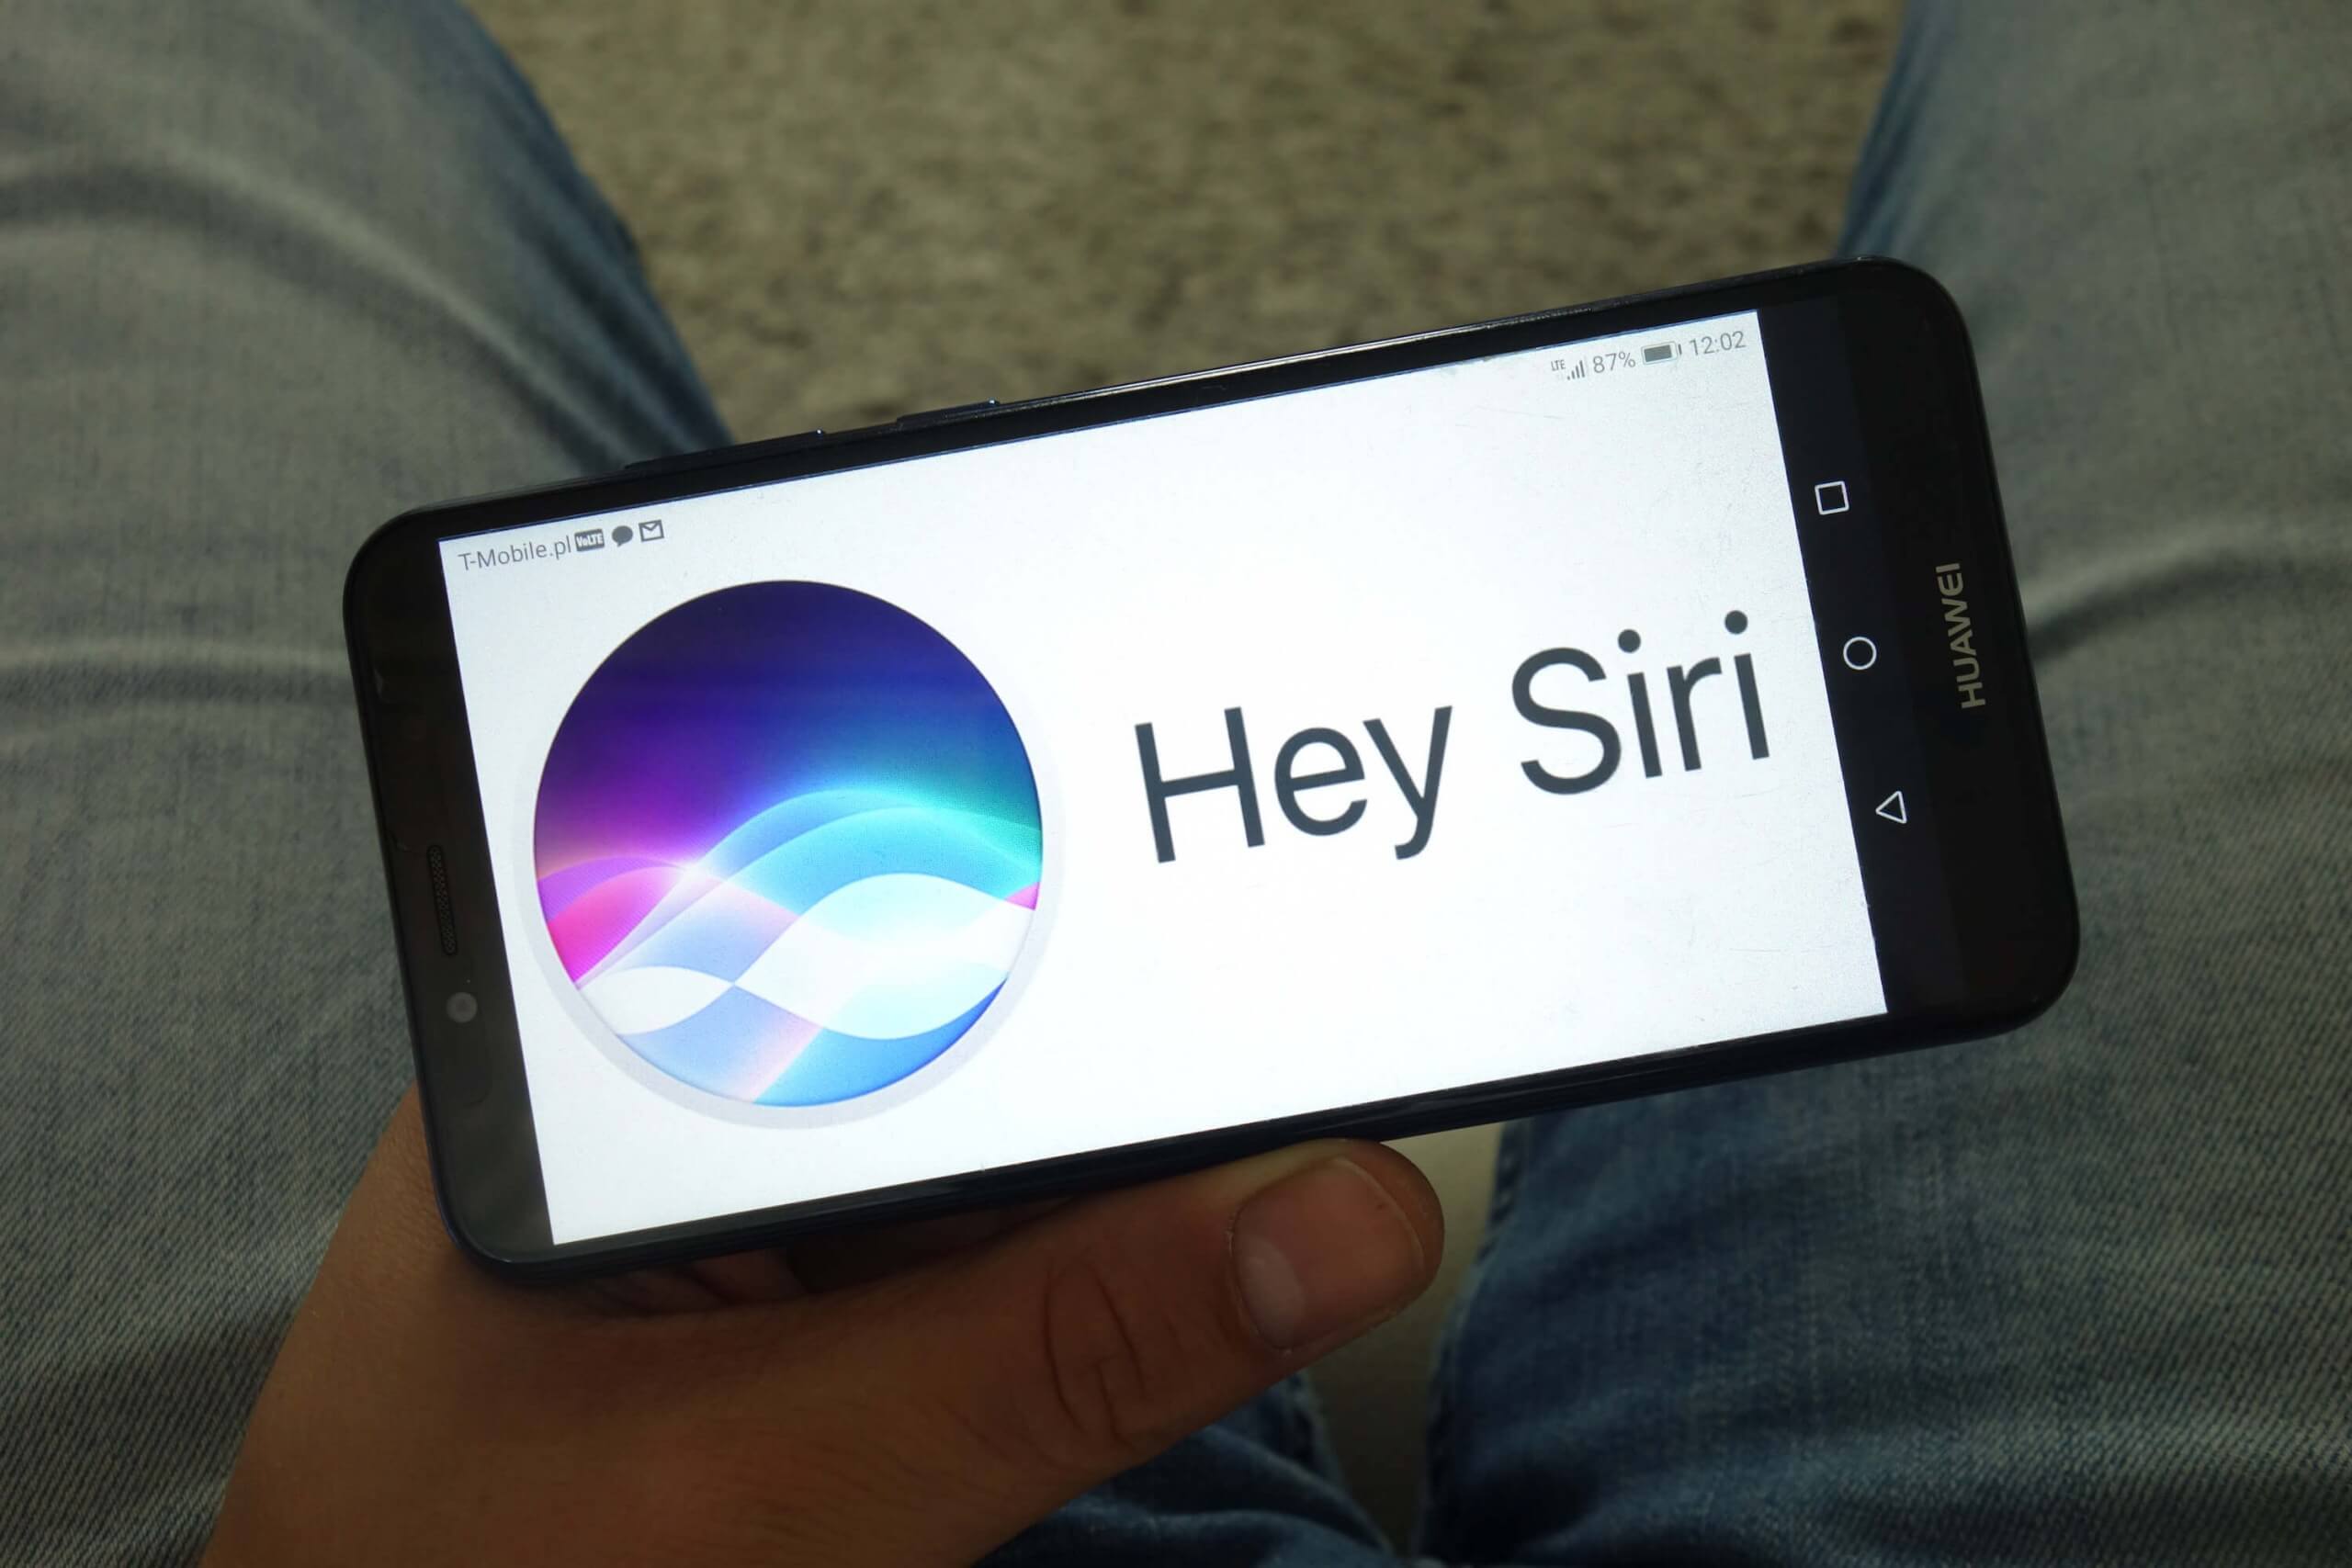 Apple QC workers often hear bits of private conversations in Siri recordings